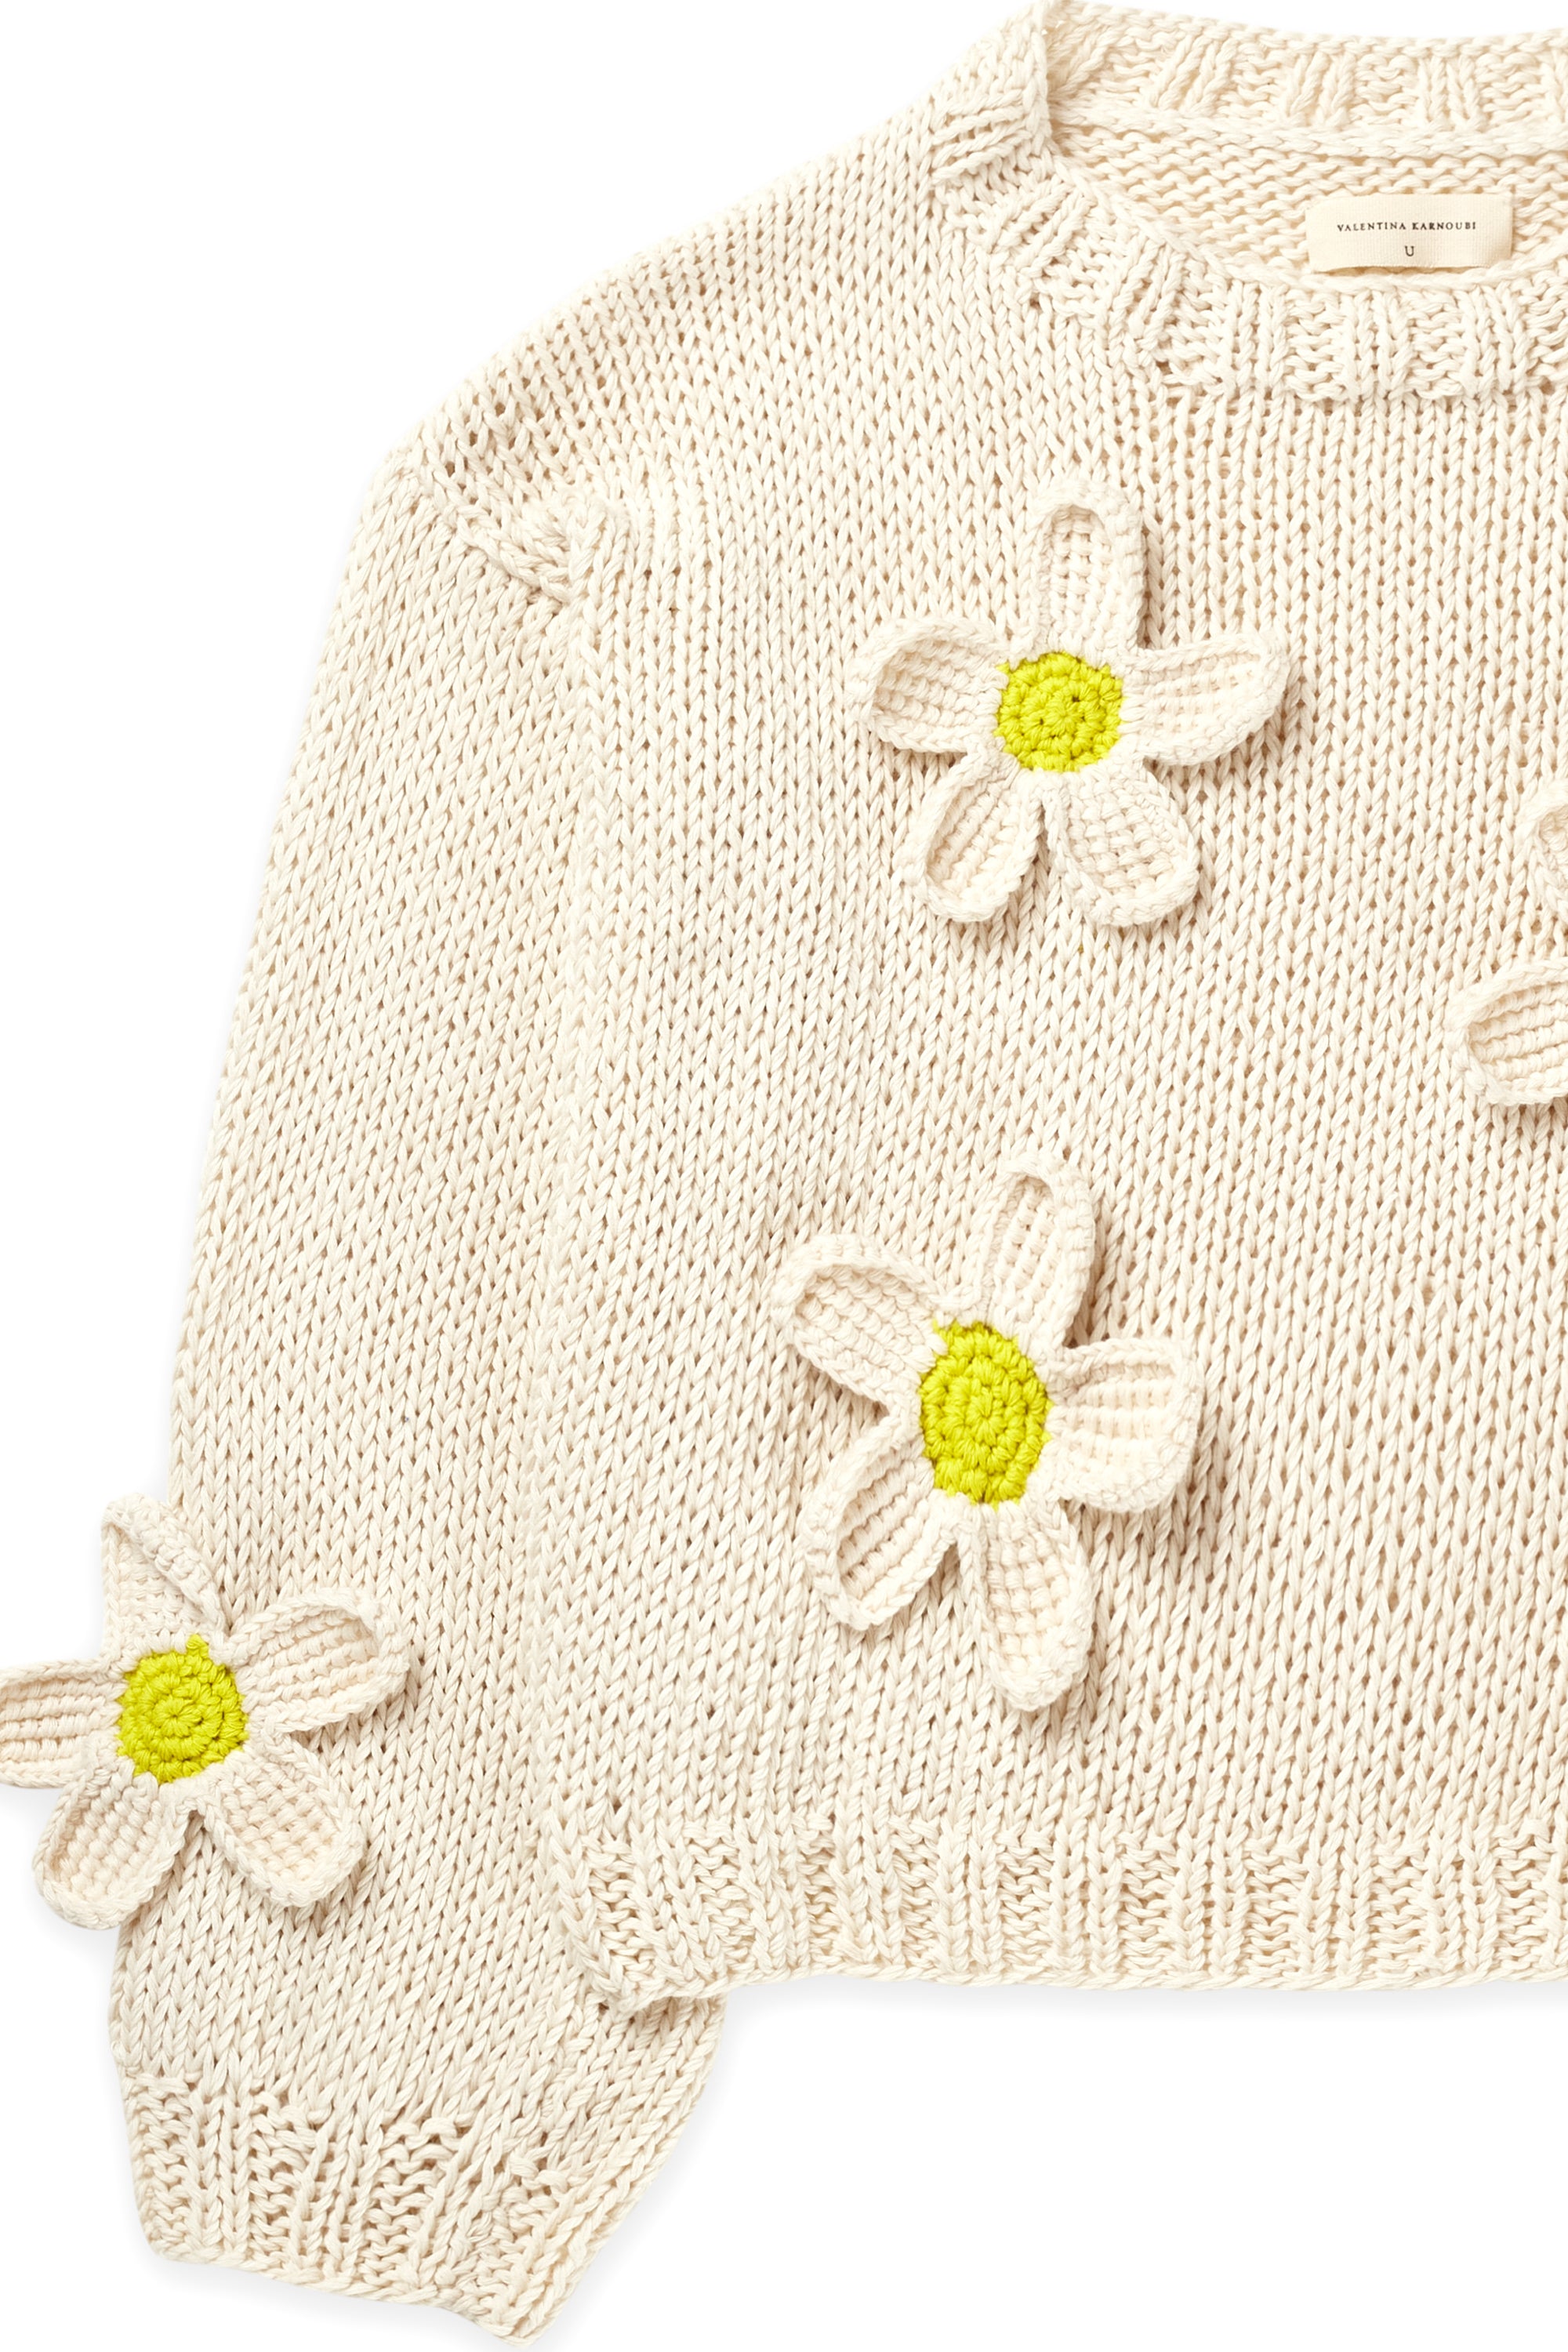 Sweater Poppy natural